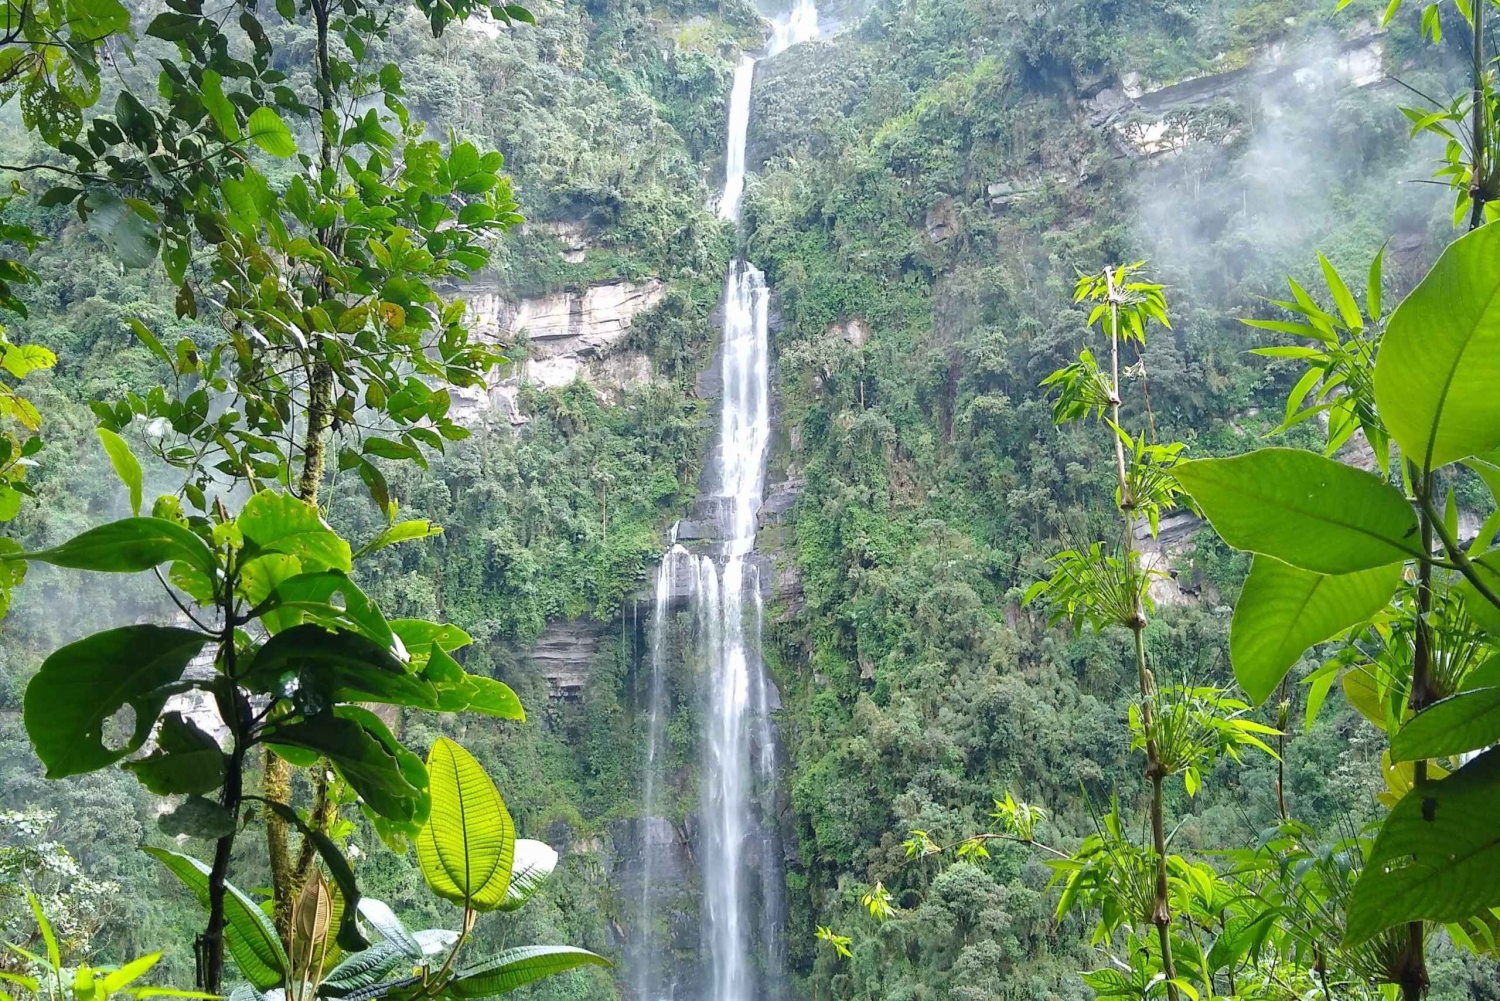 From Bogotá: Visit and hike to La Chorrera Waterfall